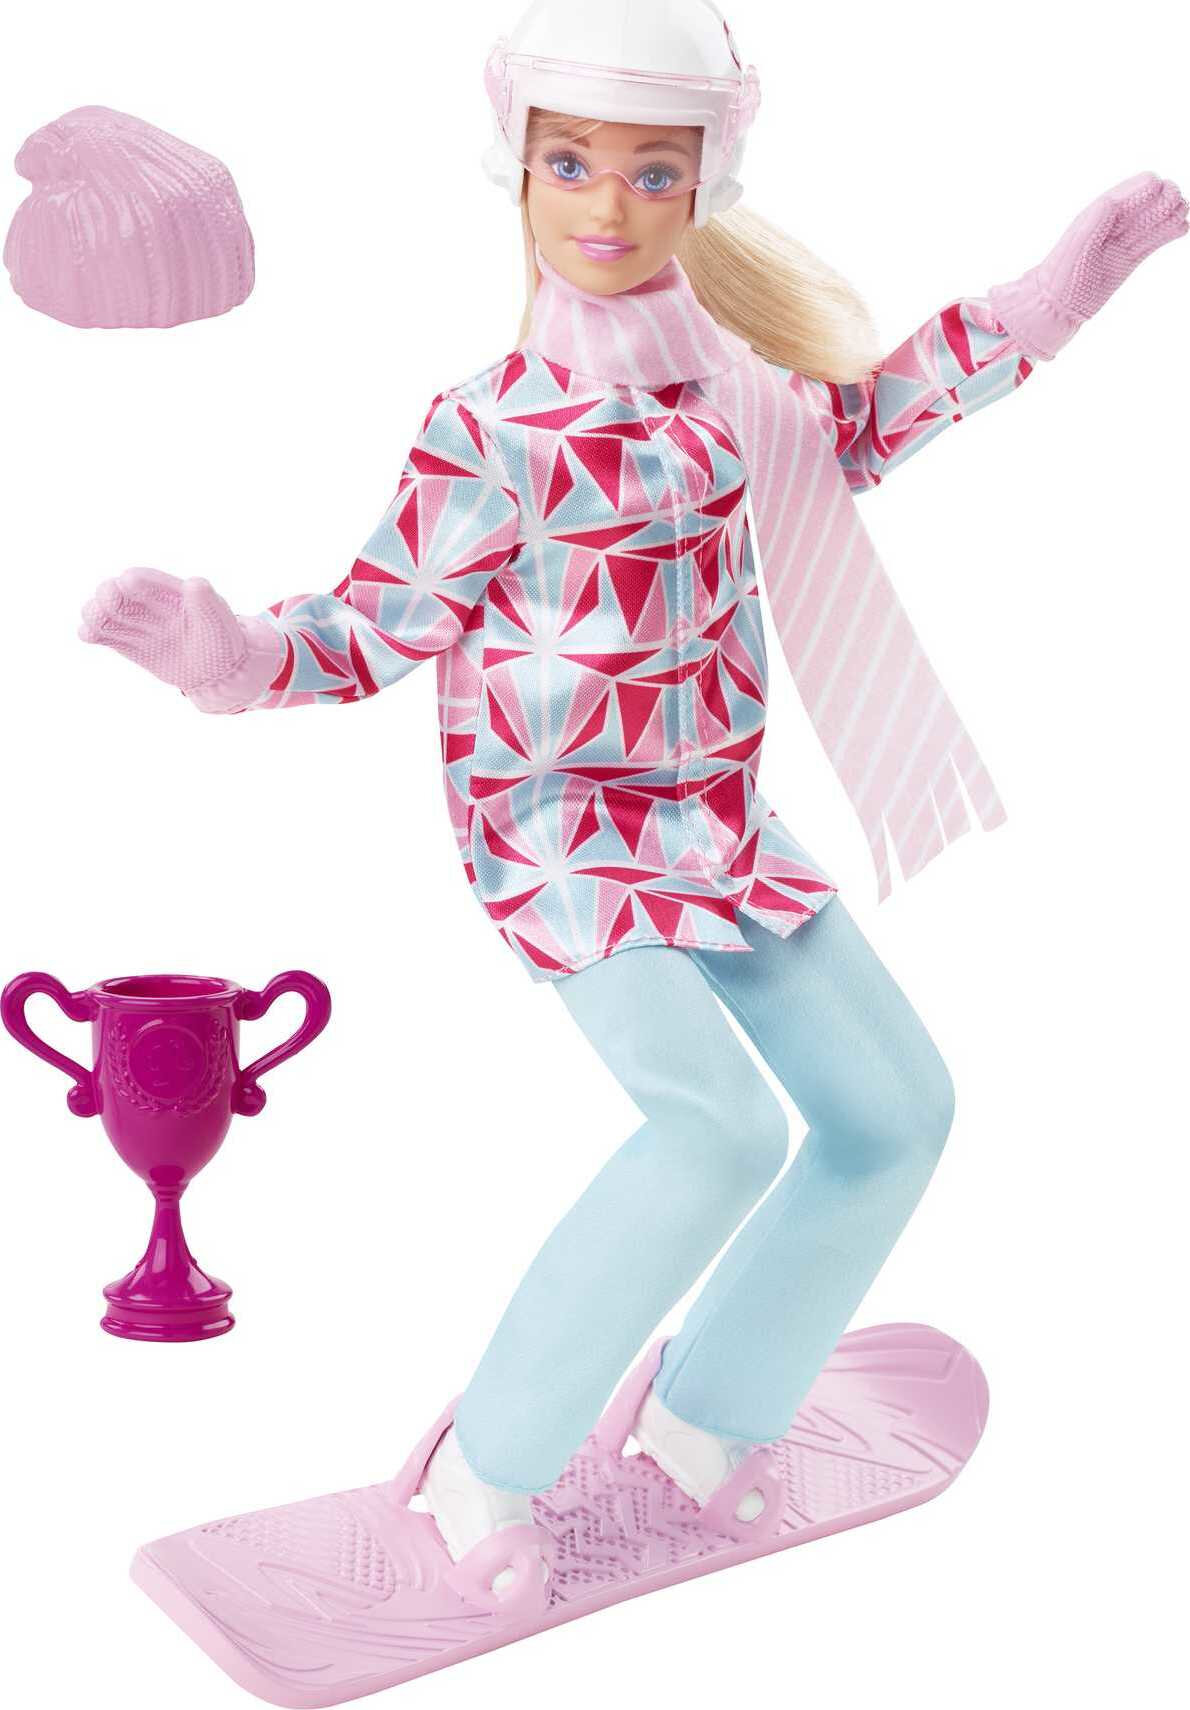 Barbie Snowboarder Fashion Doll Dressed in Jacket, Pants & Helmet, with Blonde Hair - image 1 of 6